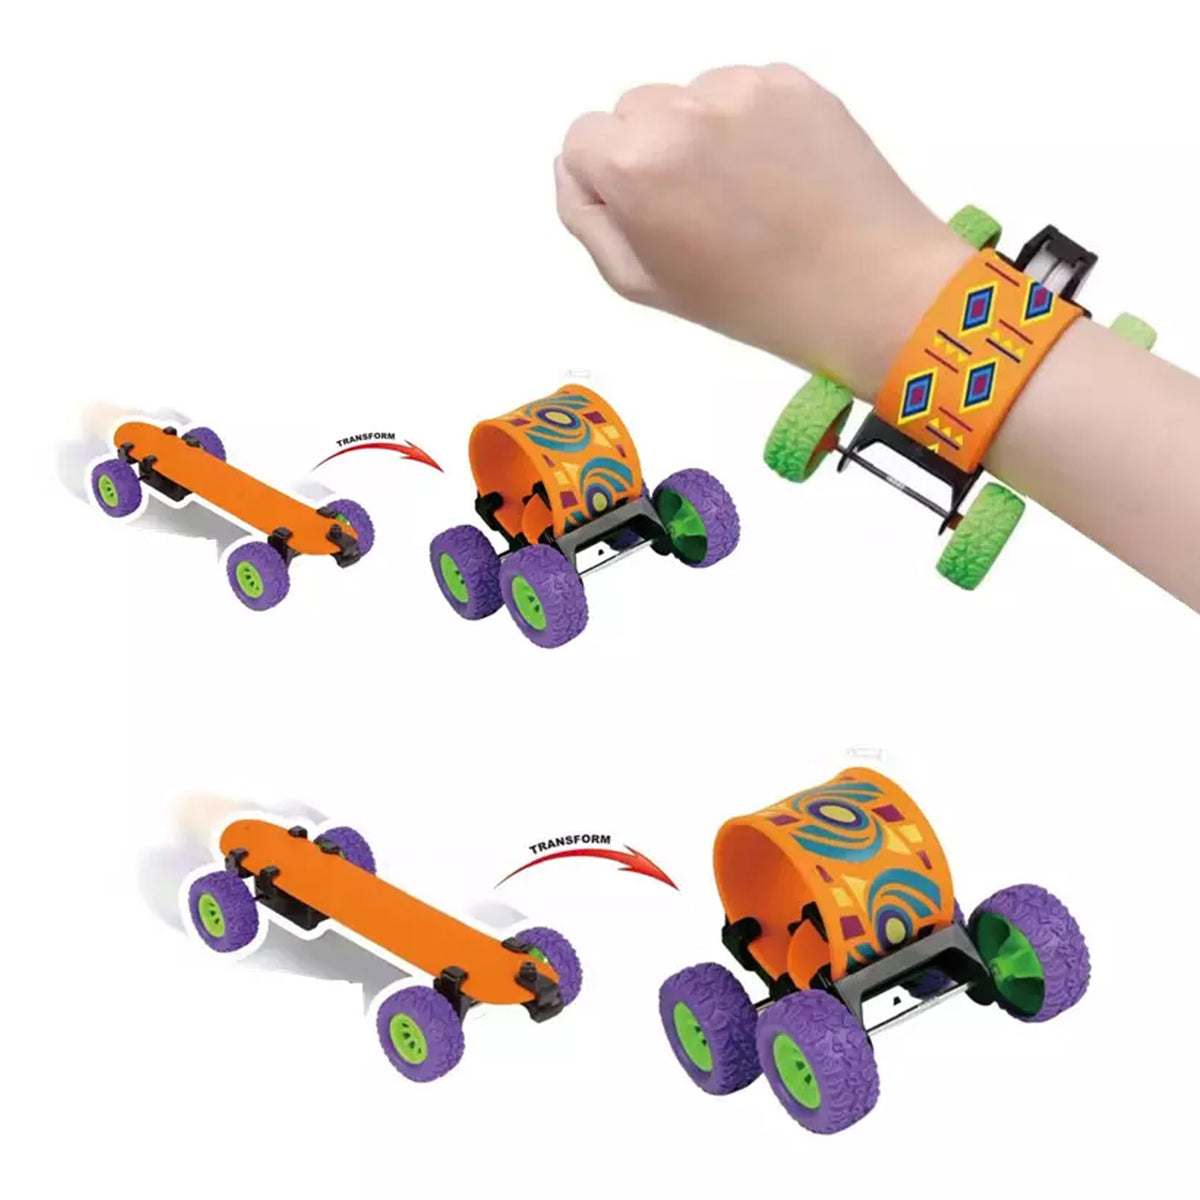 Zoom into Fun with Our Pullback Motion Car Toys for Kids